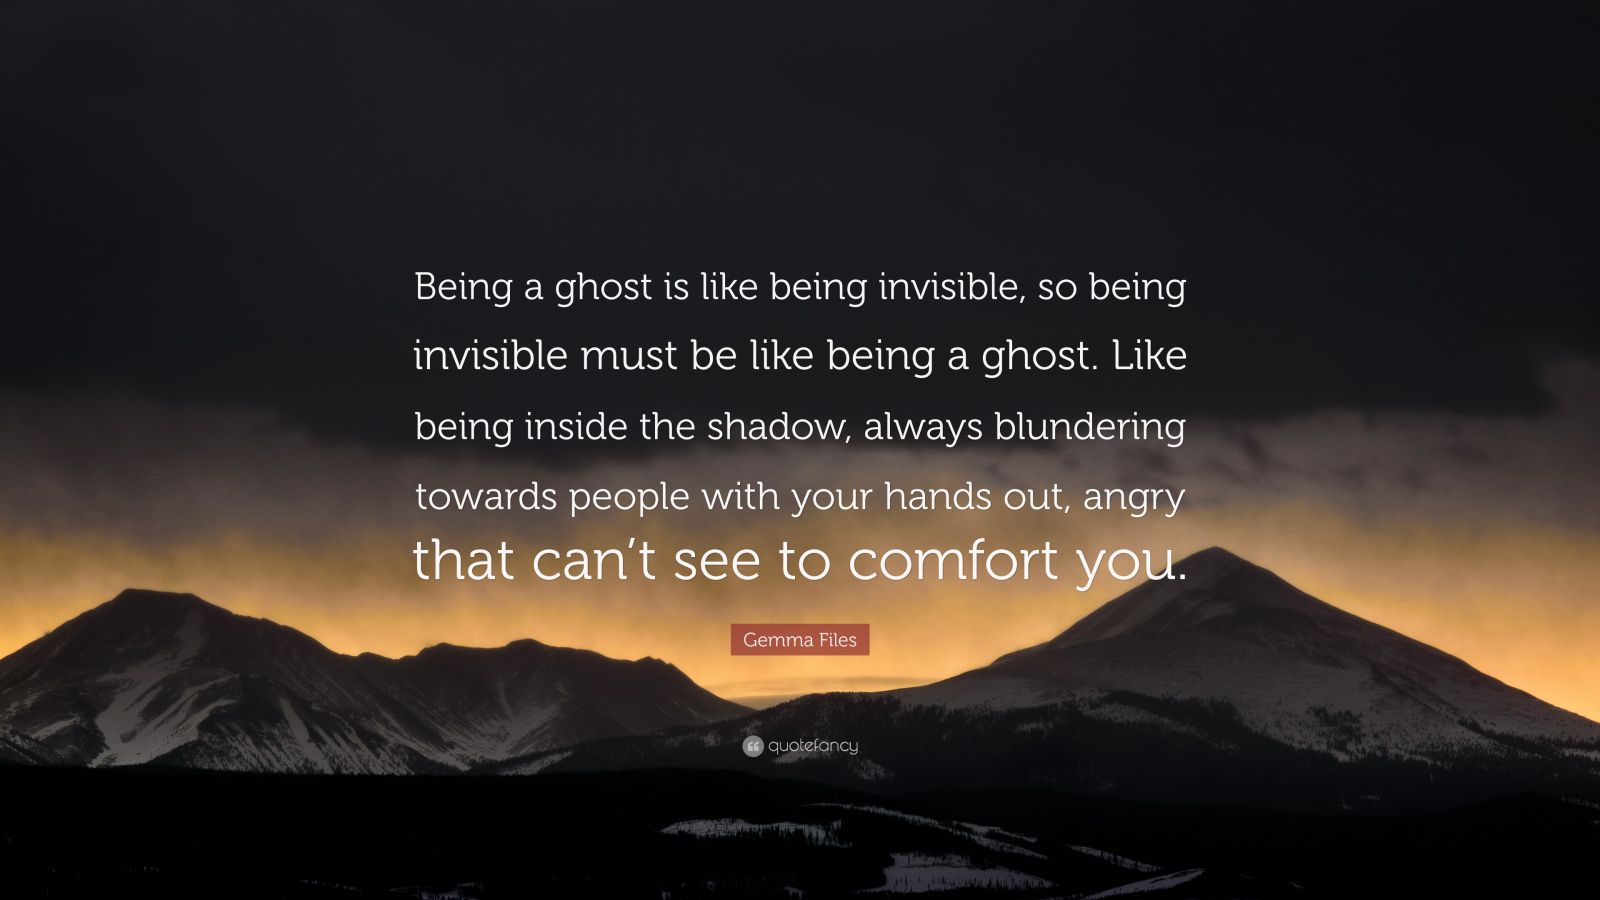 Gemma Files Quote: “Being a ghost is like being invisible, so being